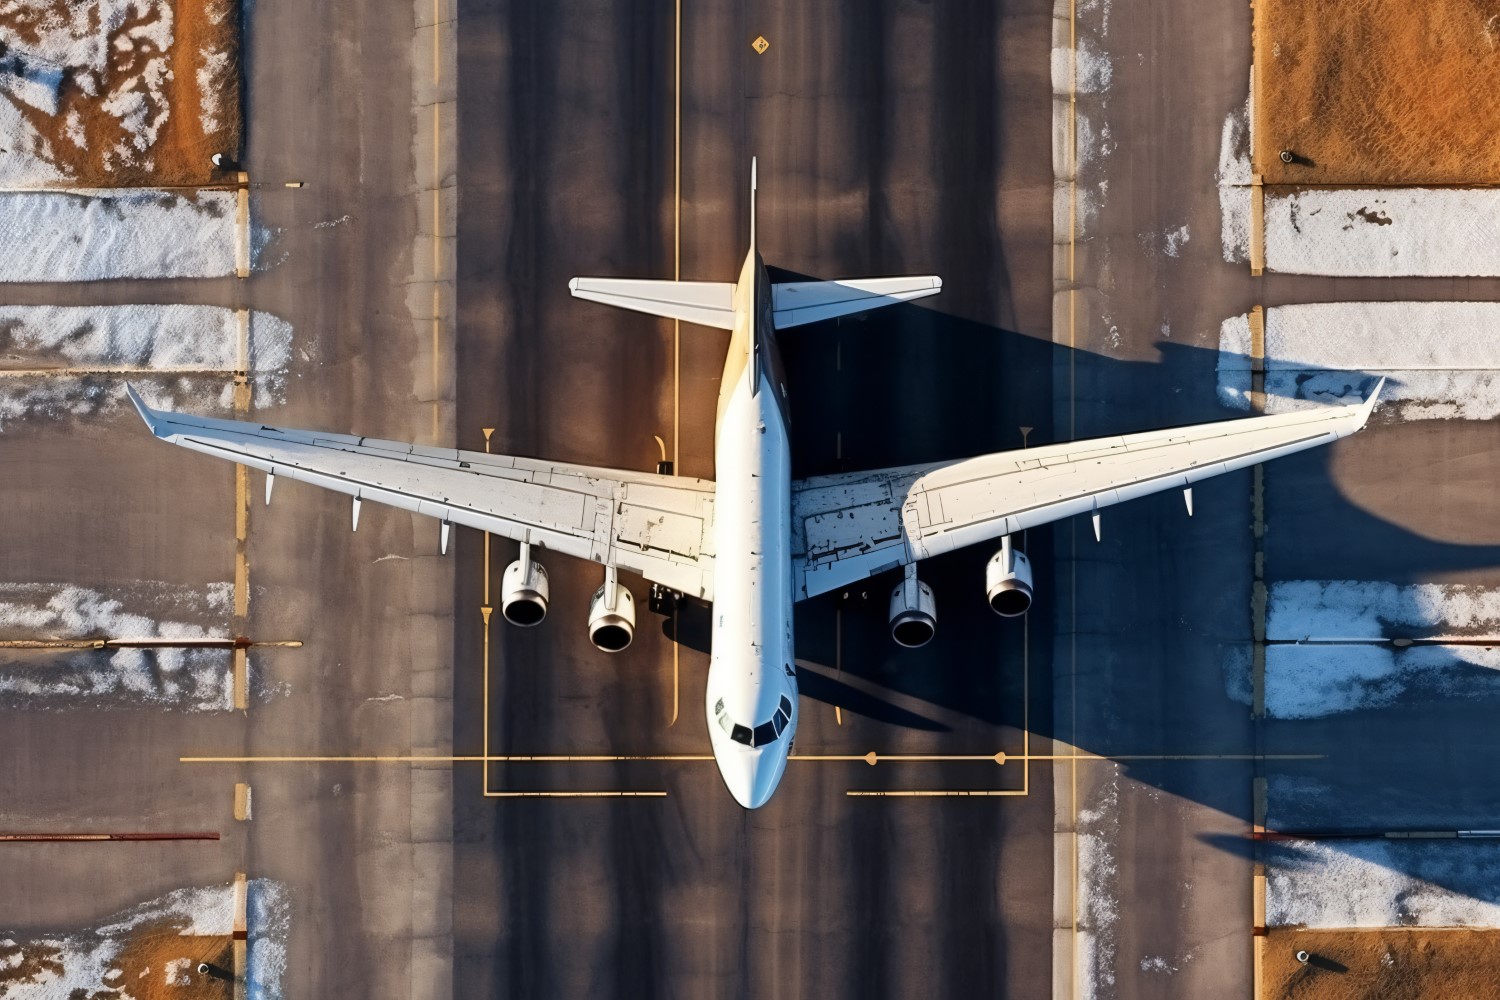 Airline aerial stock photography 68